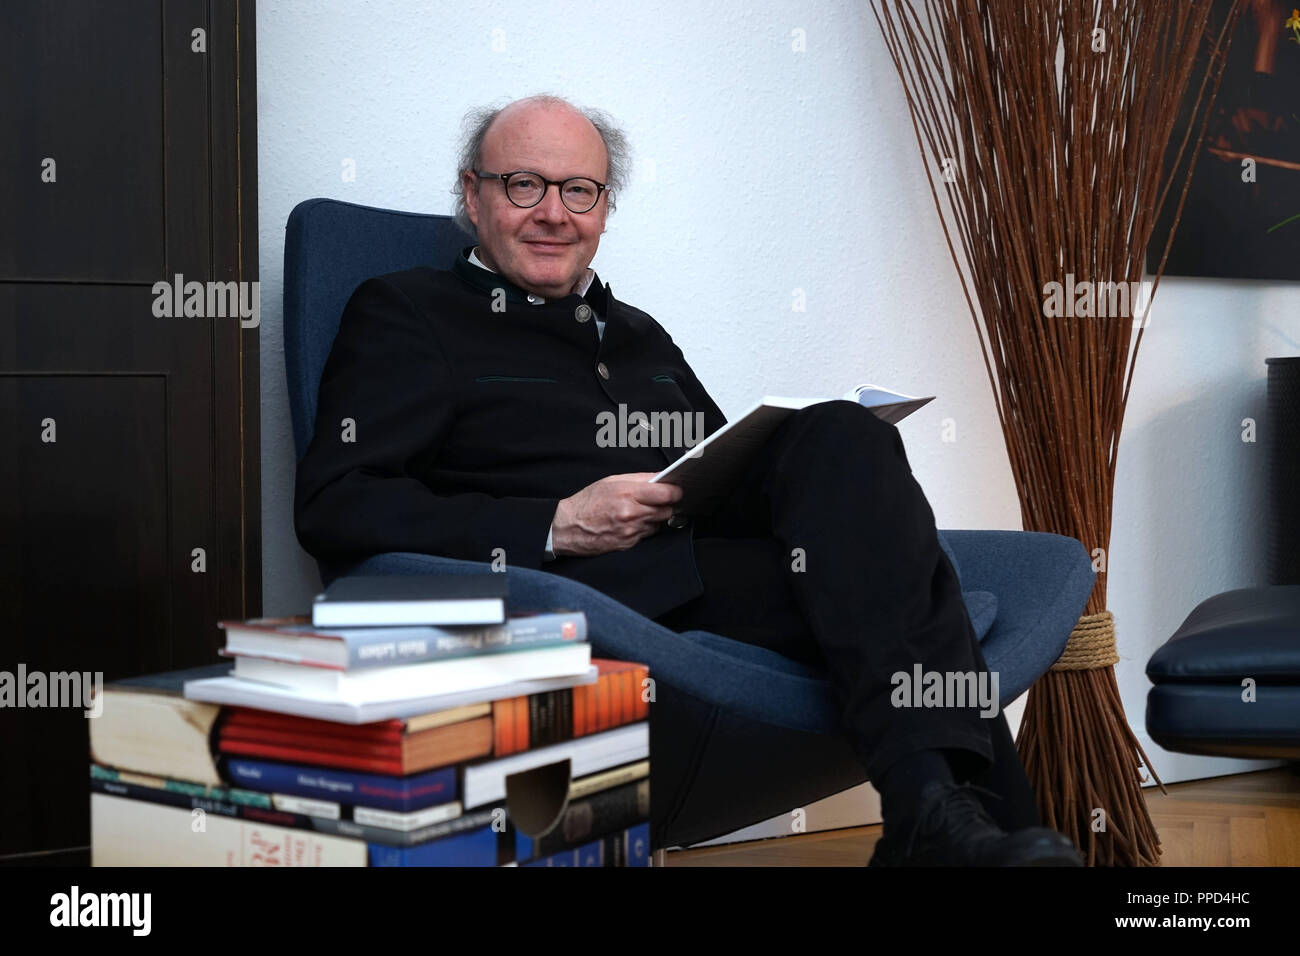 Prof. Dr. Michael Bordt SJ, Professor of Aesthetics, Anthropology and History of Philosophy, as well as Director of the Institute for Philosophy and Leadership of the Munich School of Philosophy. Stock Photo